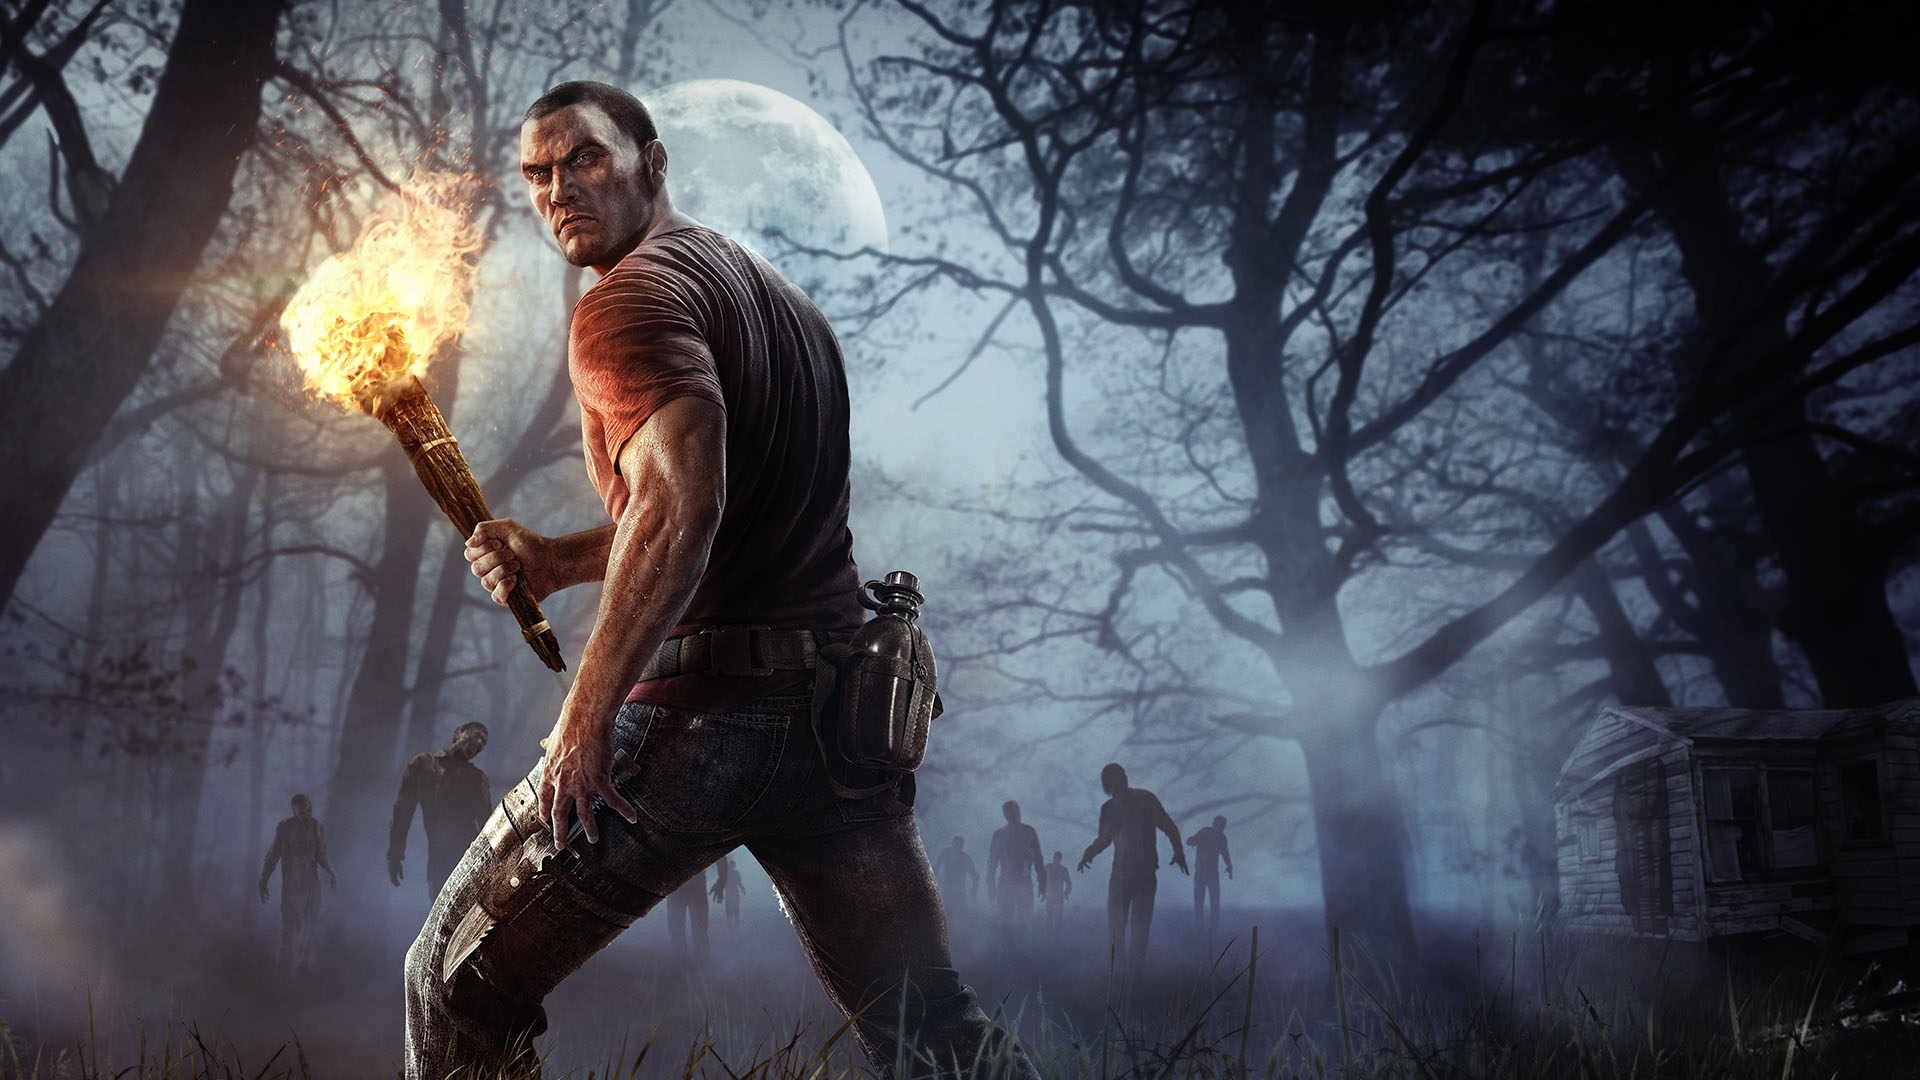 h1z1 wallpaper,action adventure game,human,digital compositing,movie,fictional character